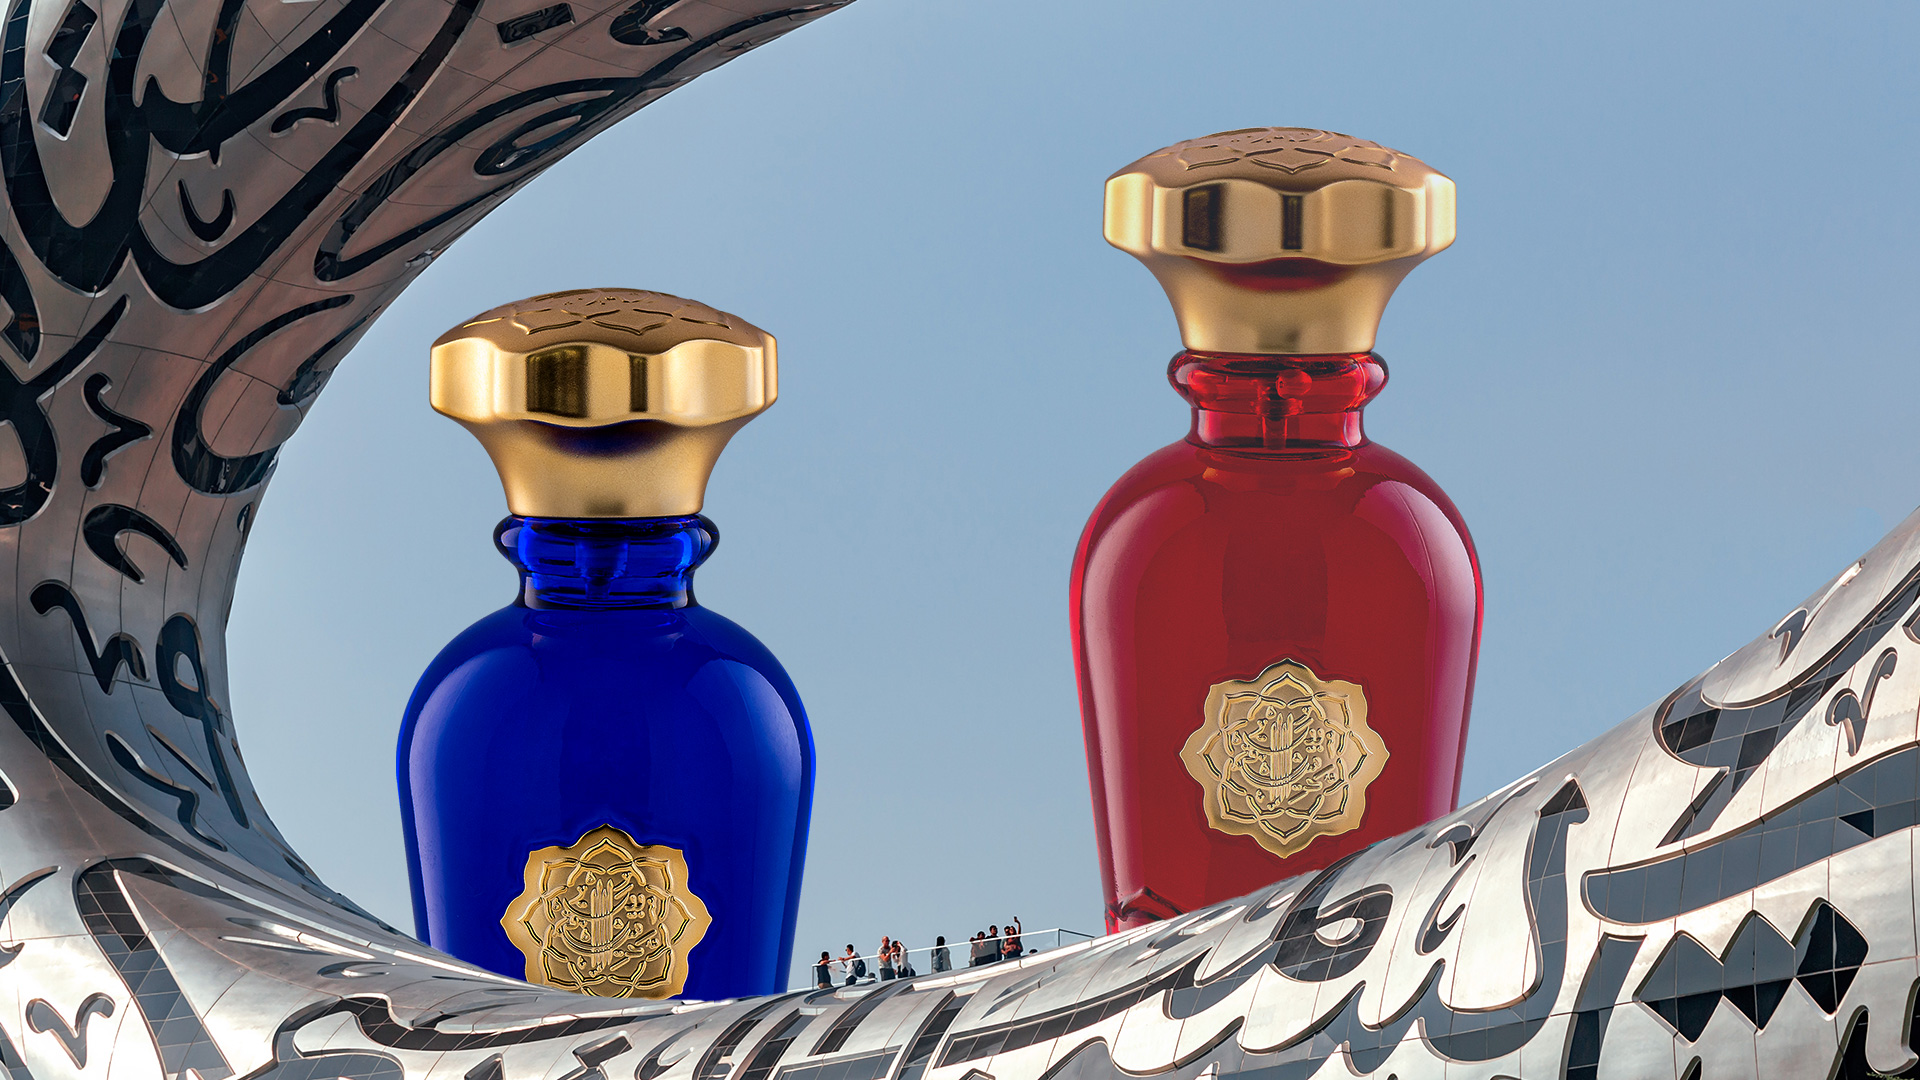 Discover the Fragrance of Your Dreams: Shop Our Copy of Premium Brand Perfume at Cheap Prices